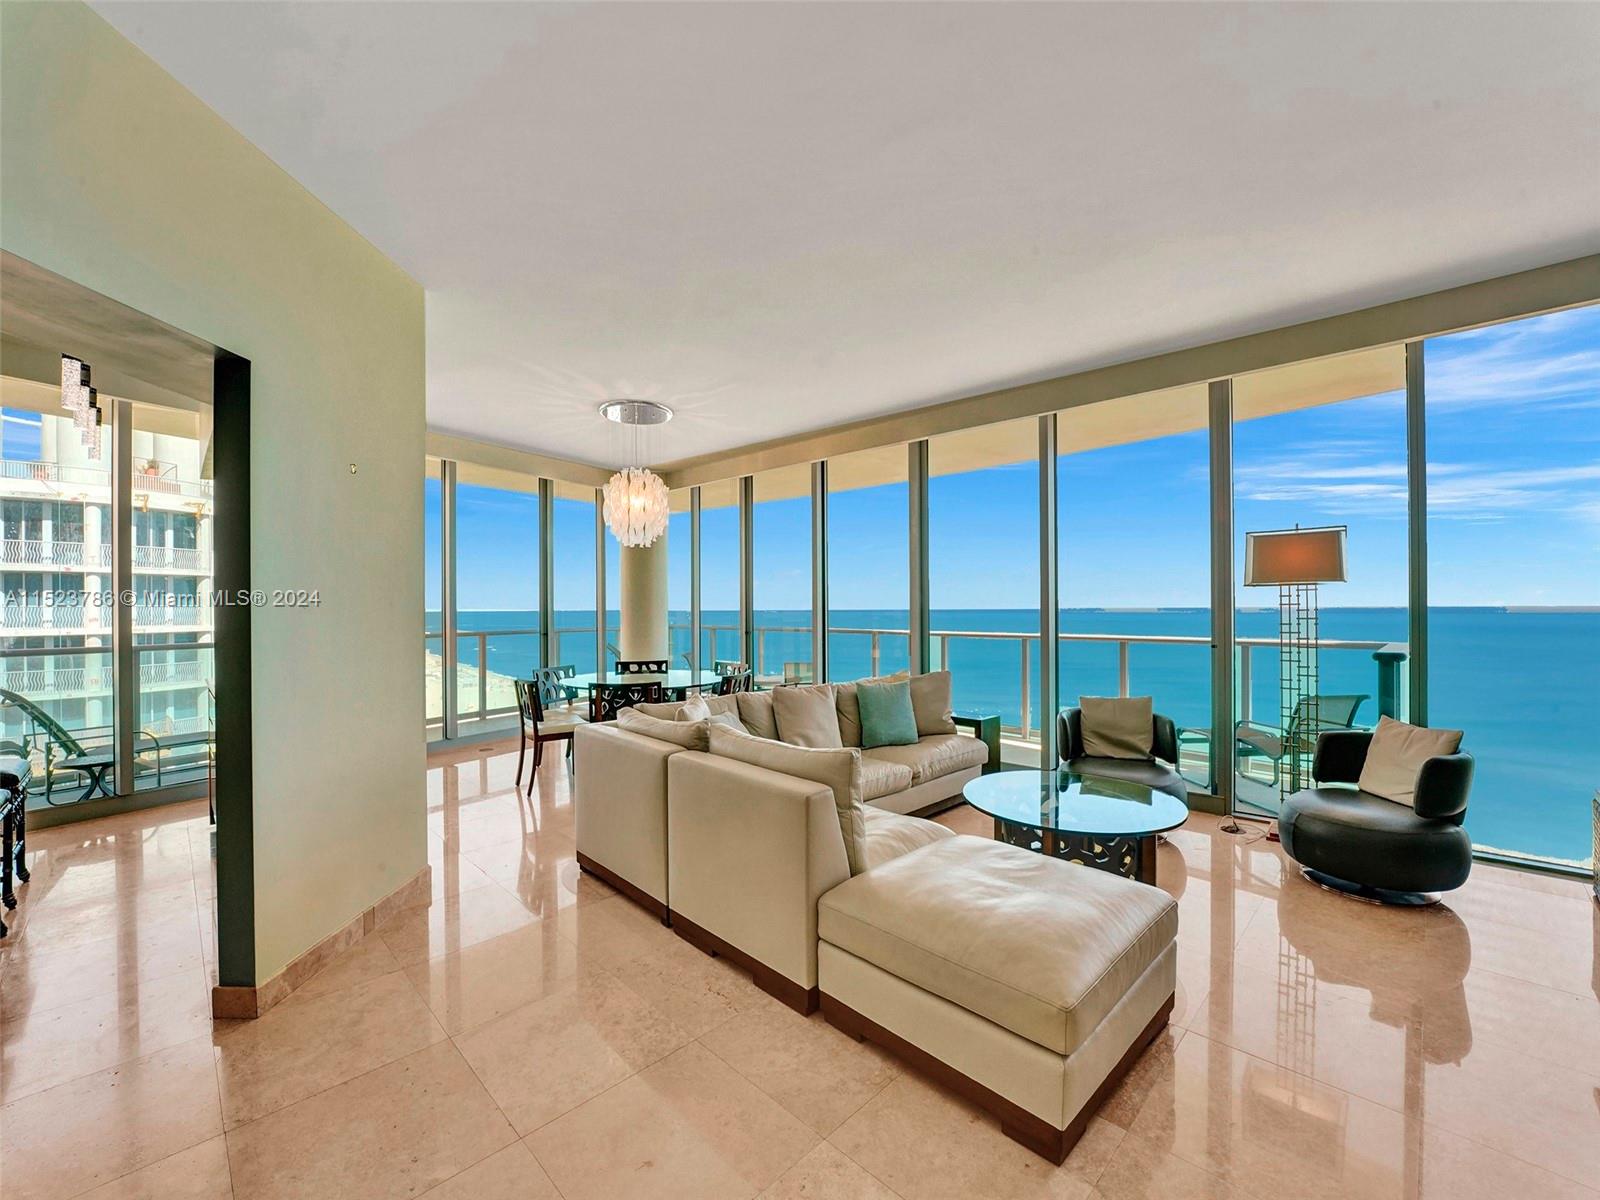 Step off your private elevator to direct ocean views from this wonderful  Lower Penthouse at Il Villaggio. A corner apartment offering high ceilings, breathtaking views, an expansive wrap-around terrace and plenty of light and space.  The primary suite has a double bath and huge master closet. Subzero and Miele appliances in the eat in kitchen. Il Villaggio is known for its specialized 5-star service, security, privacy and excellent management.  Beach service offers towels, chairs, umbrellas and drinks. The impressive luxury amenities have all been newly renovated; pool, large fitness center with all new equipment, library, meeting and party facilitates and much more.
The apartment comes turnkey so you can move right in and start enjoying the Il Villaggio lifestyle.